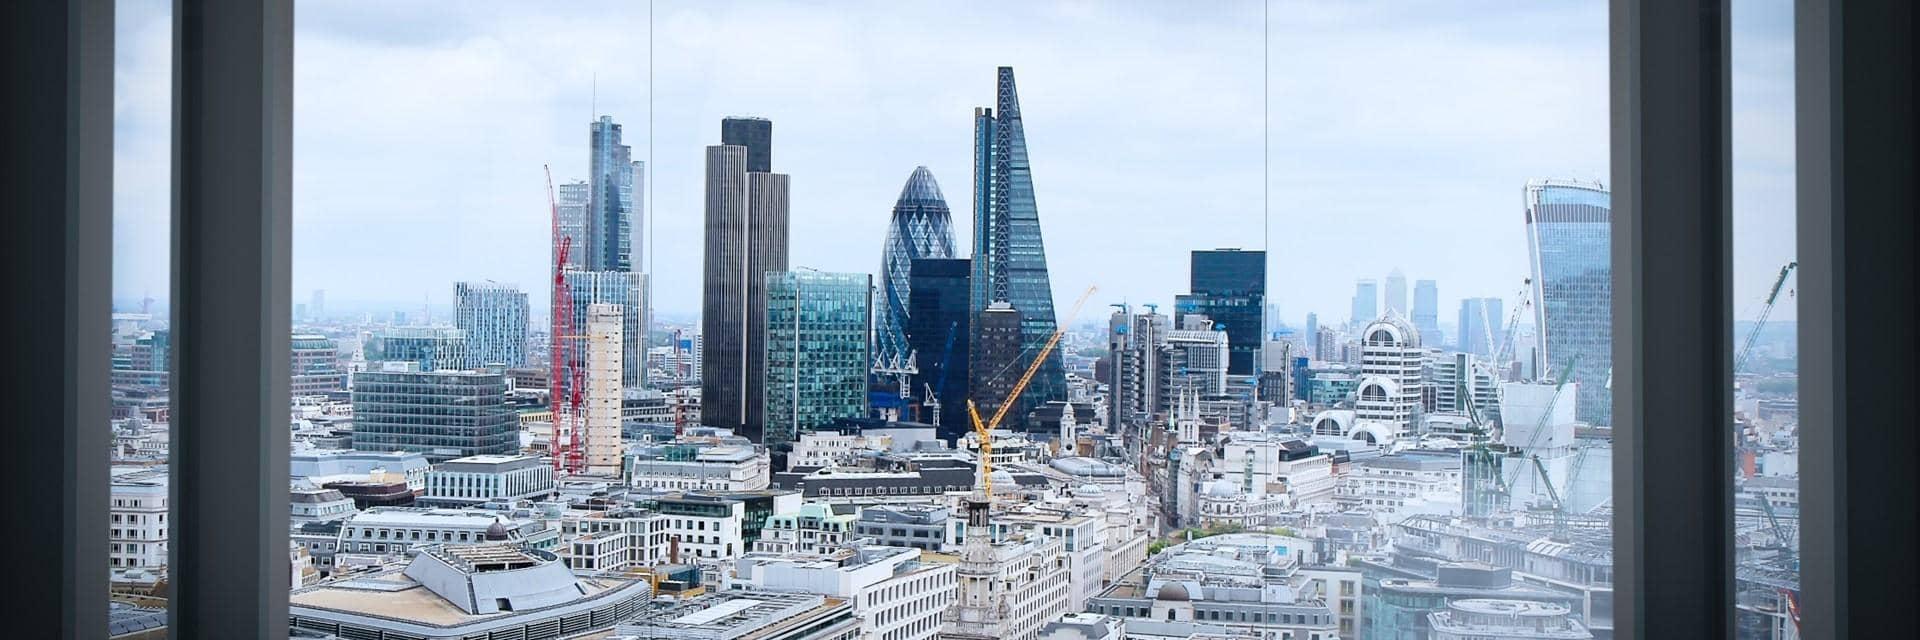 Part of the London city skyline. The ISO 20022 standard Is set to transform the payment industry